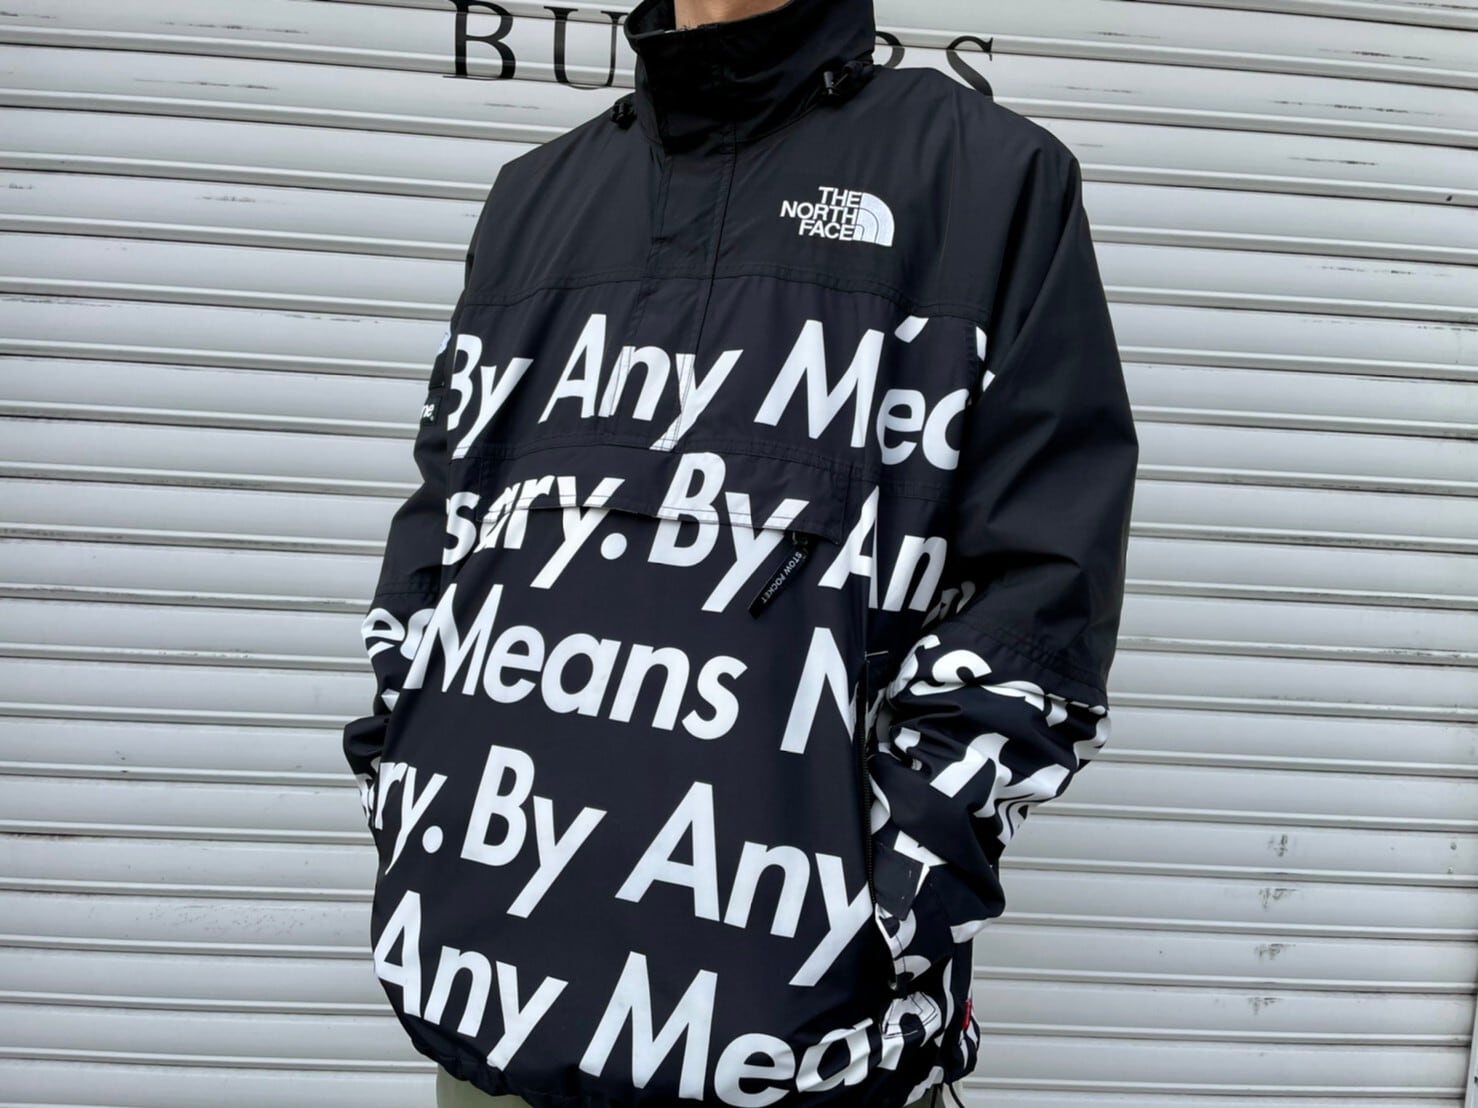 Supreme / THE NORTH FACE BY ANY MEANS